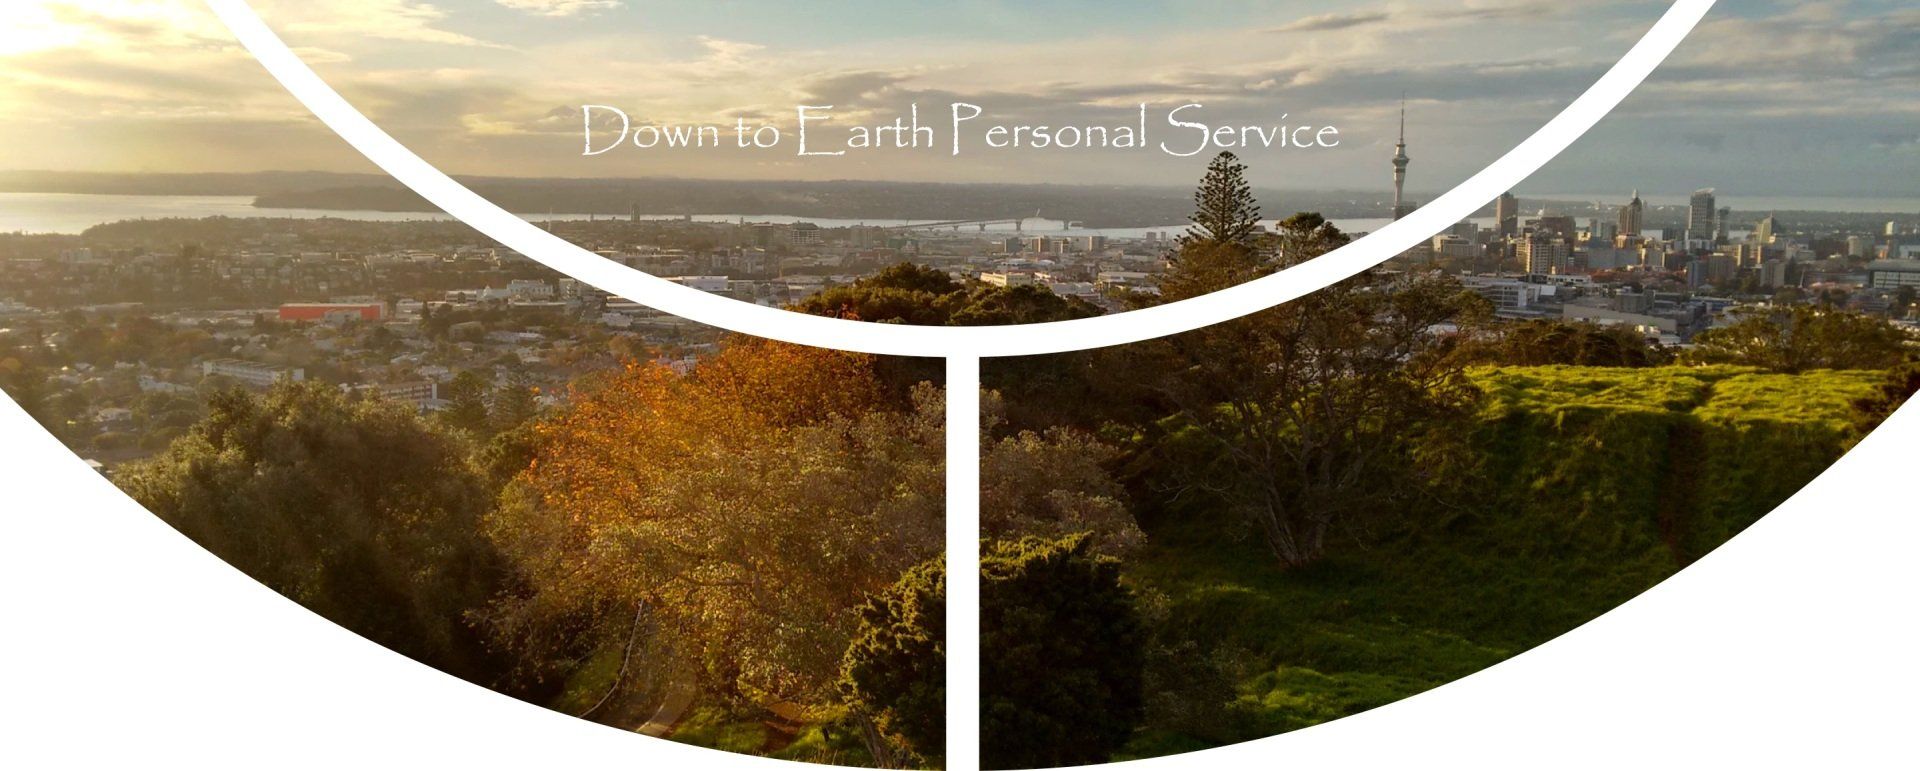 Down to Earth Personal Service